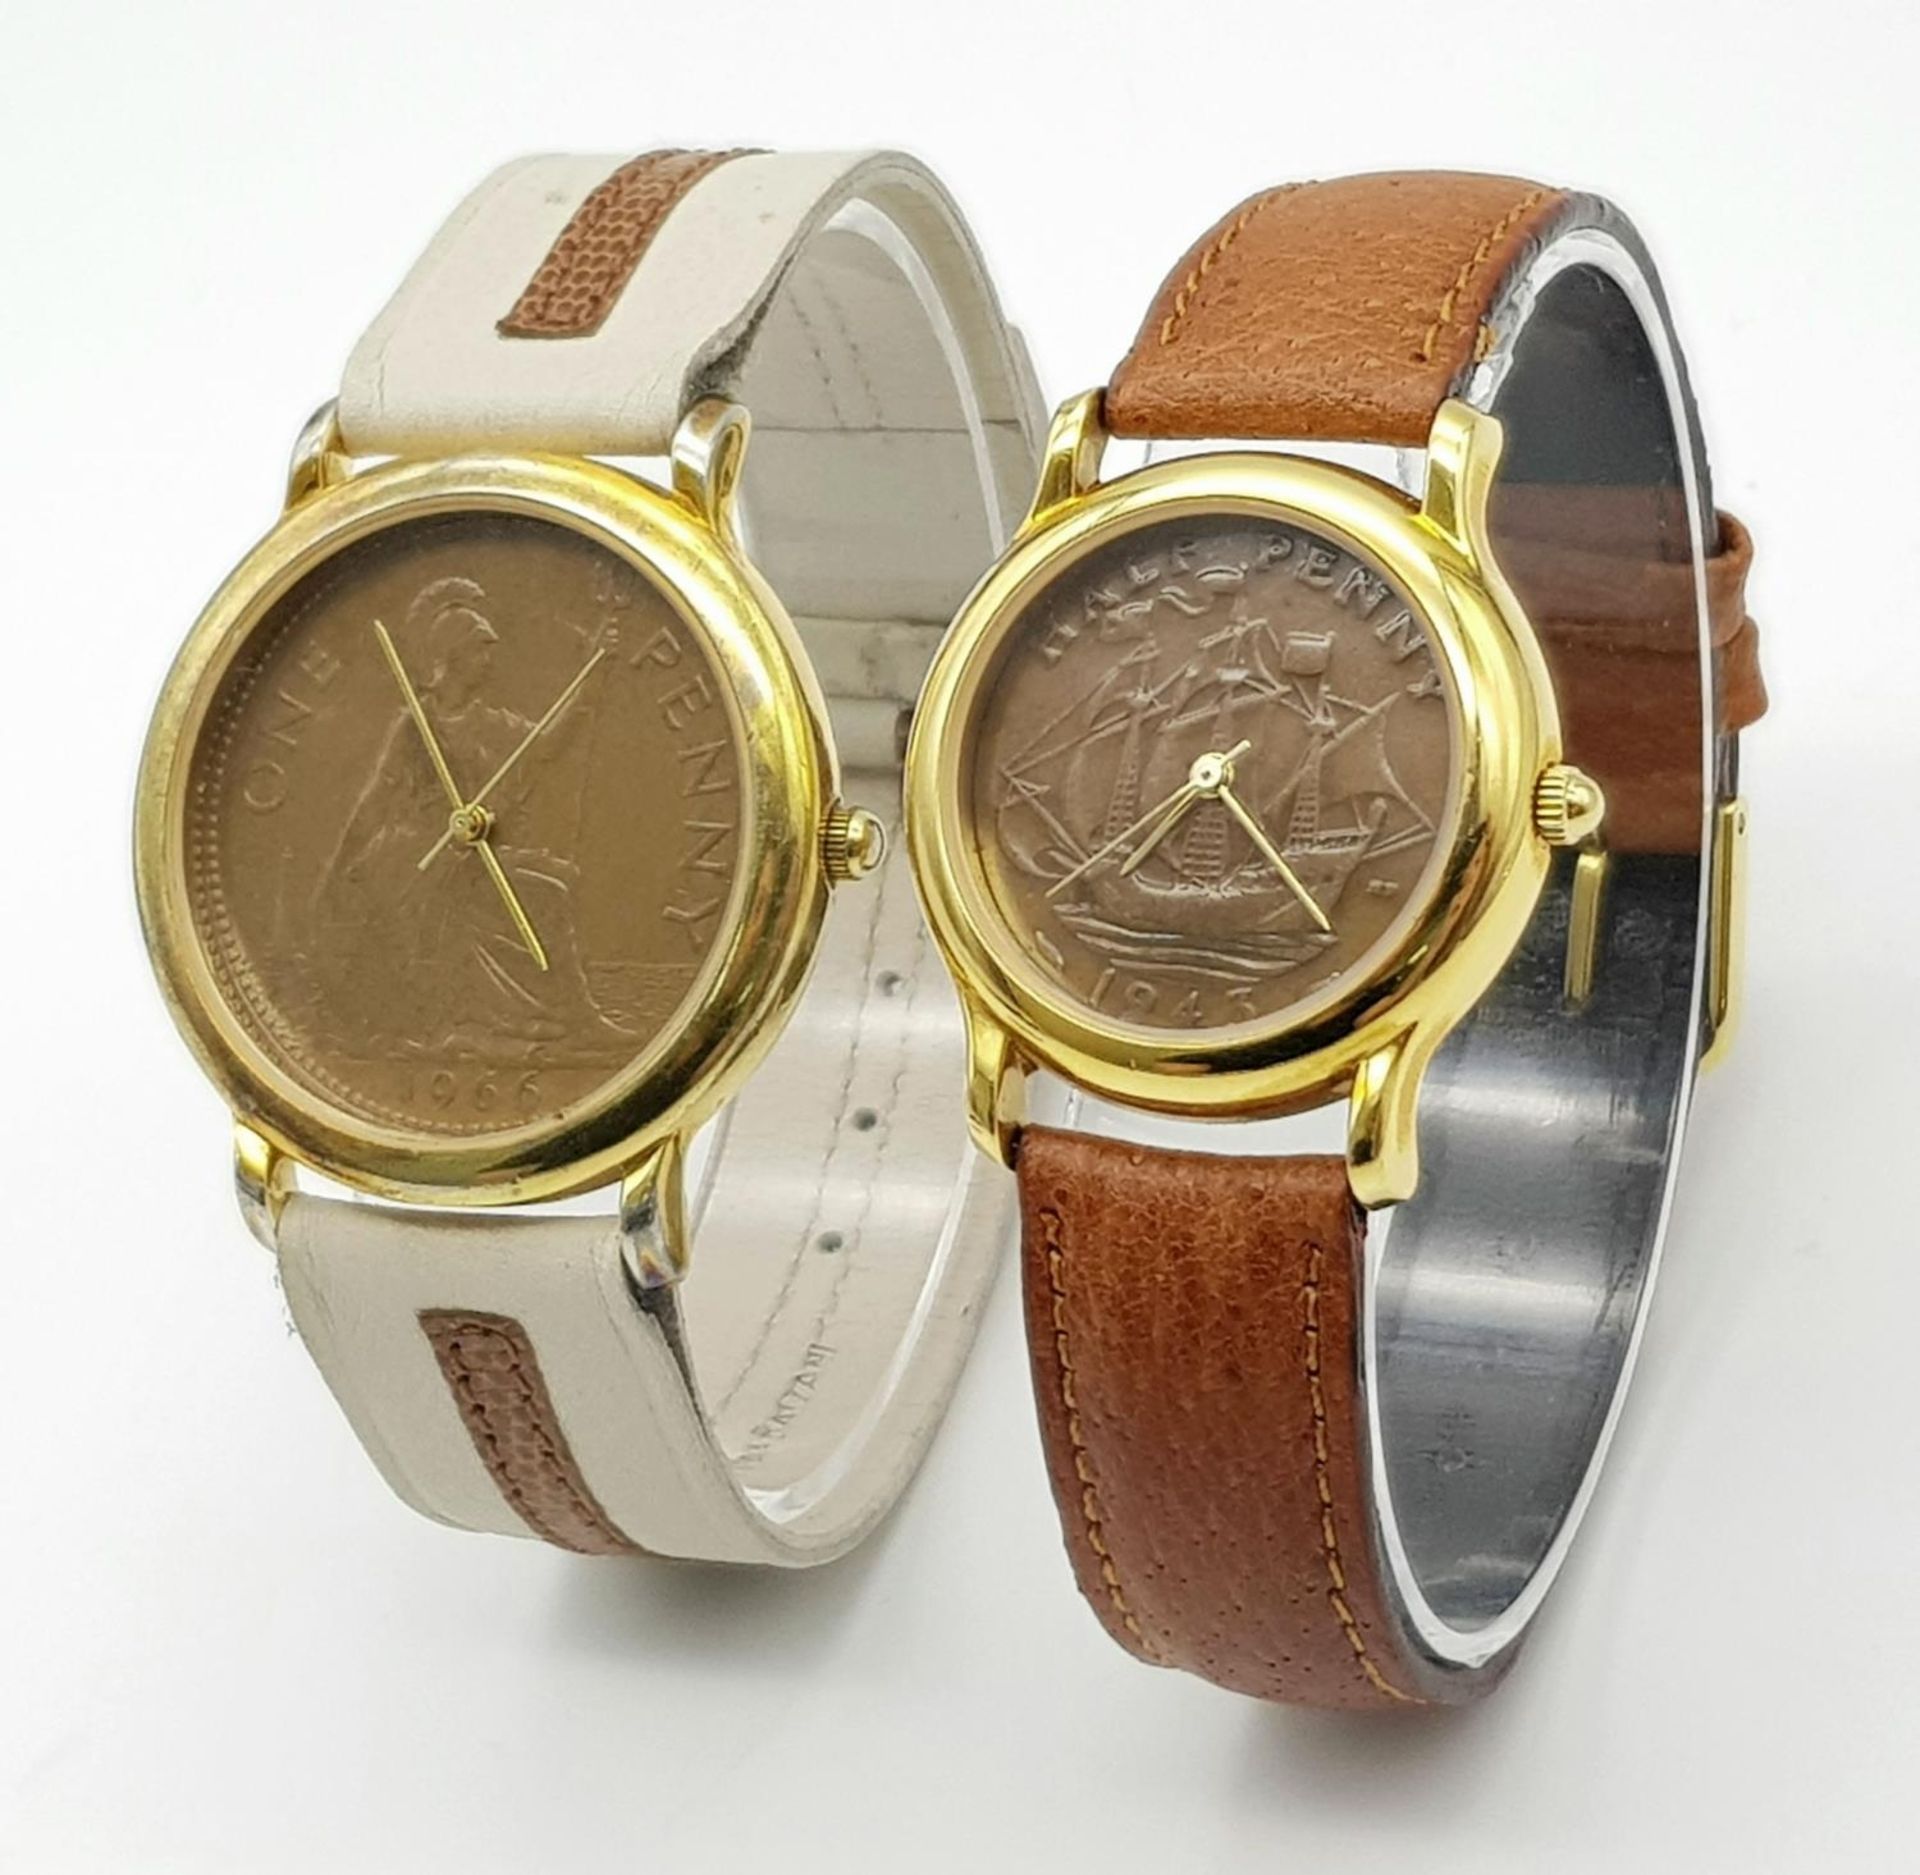 Two Vintage Coin Quartz Watches - 1966 penny - 36mm and 1943 Half Penny - 30mm. Both in working